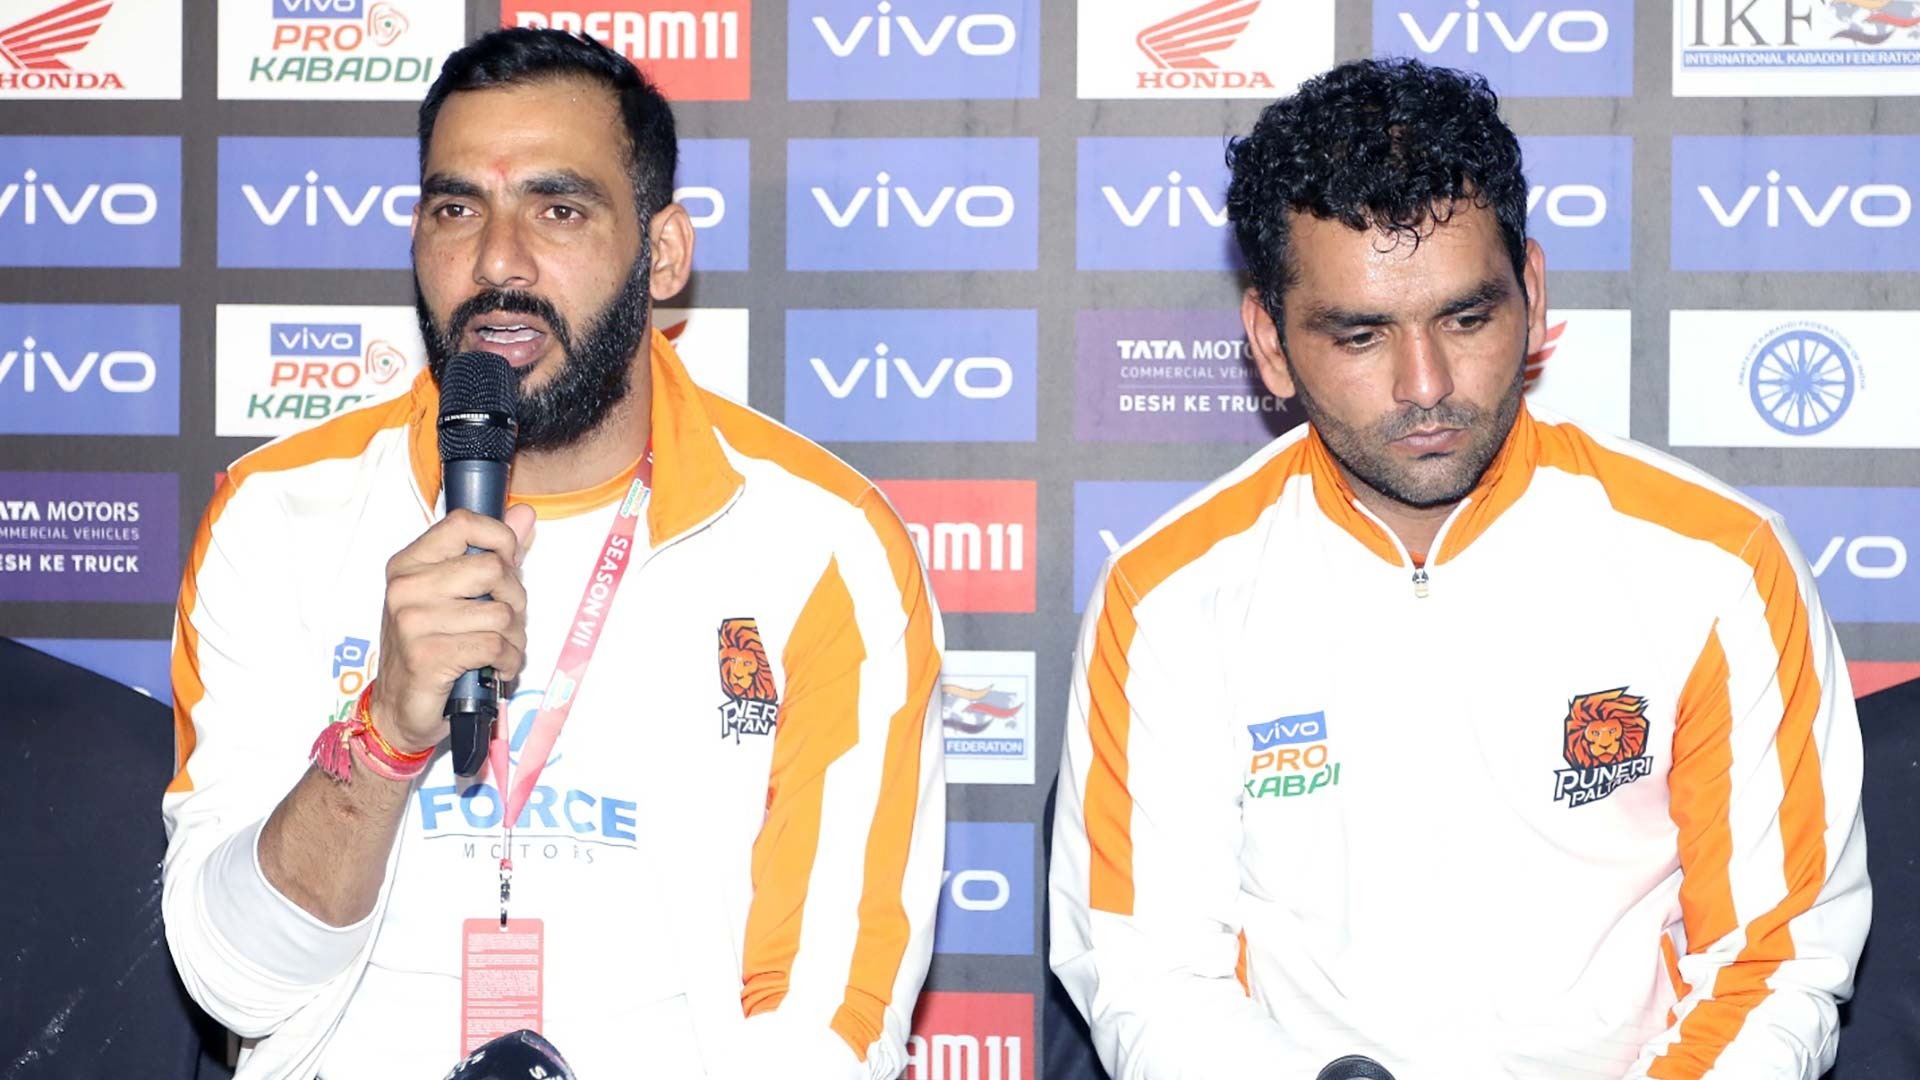 PKL 2019 | Puneri Paltan are currently understaffed in left cover department, reveals Anup Kumar